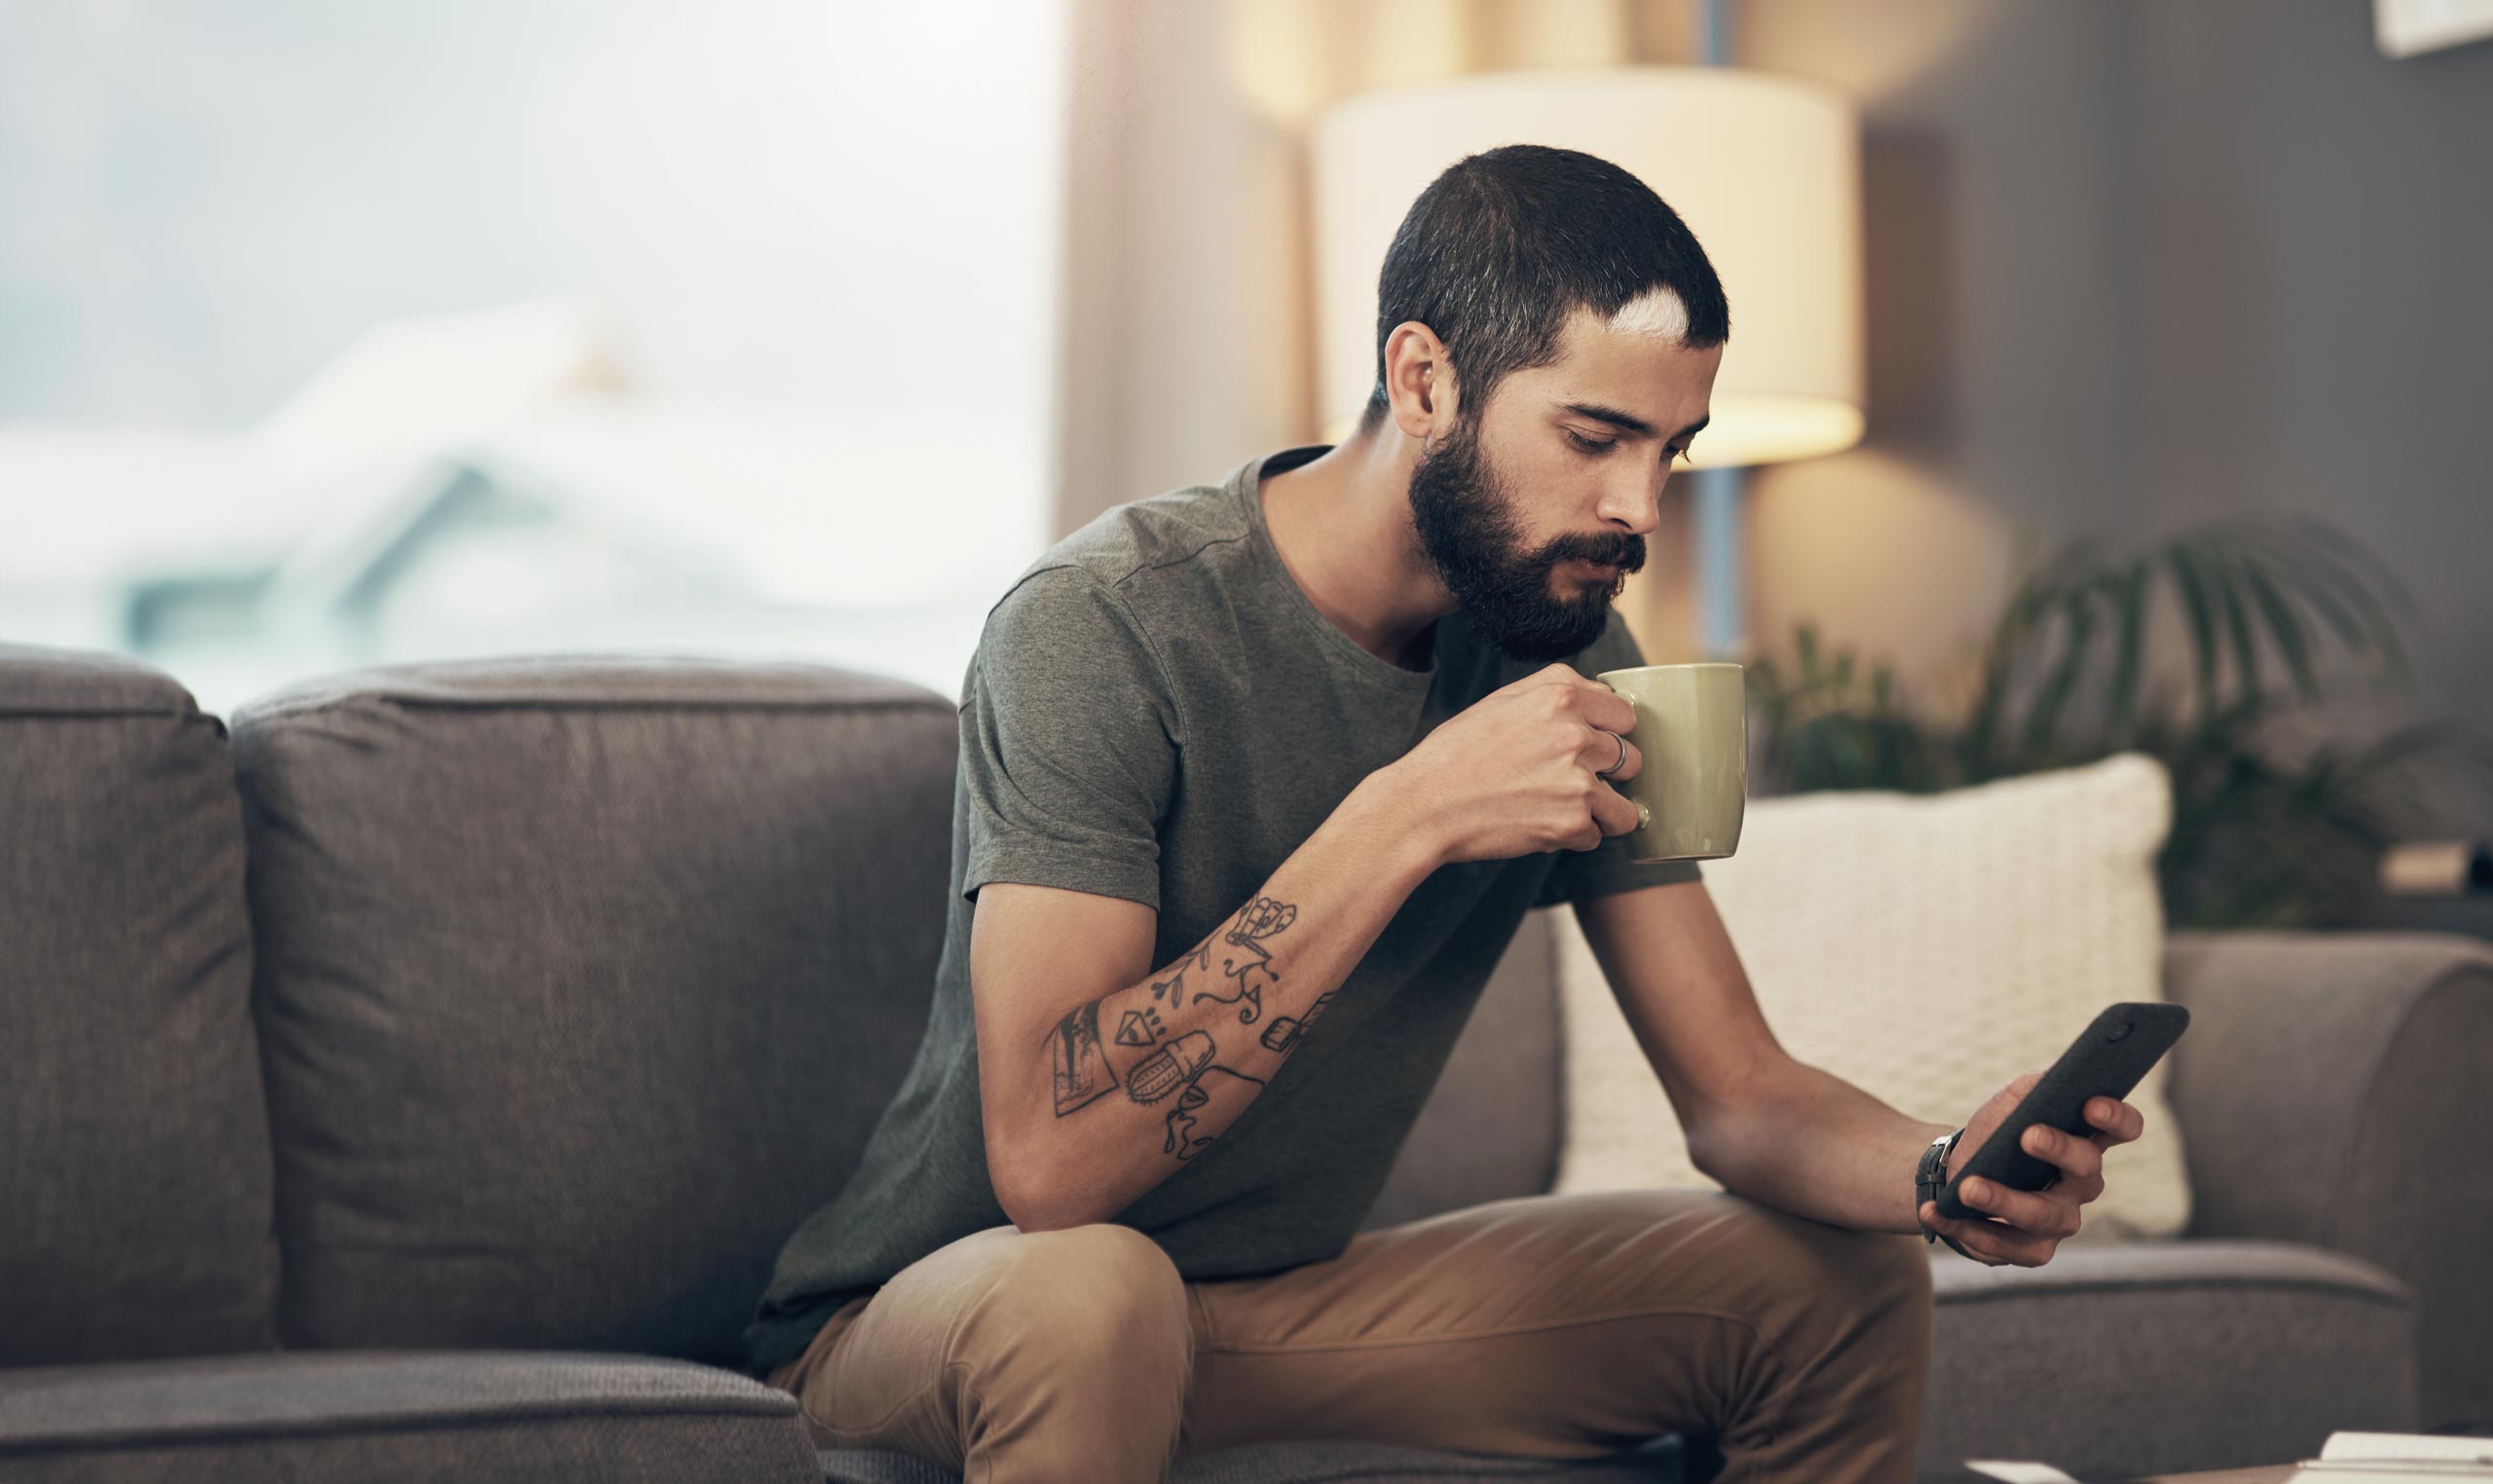 Slender young man with a beard, sitting on a couch drinking coffee and looking at the YOPX app on his phone.